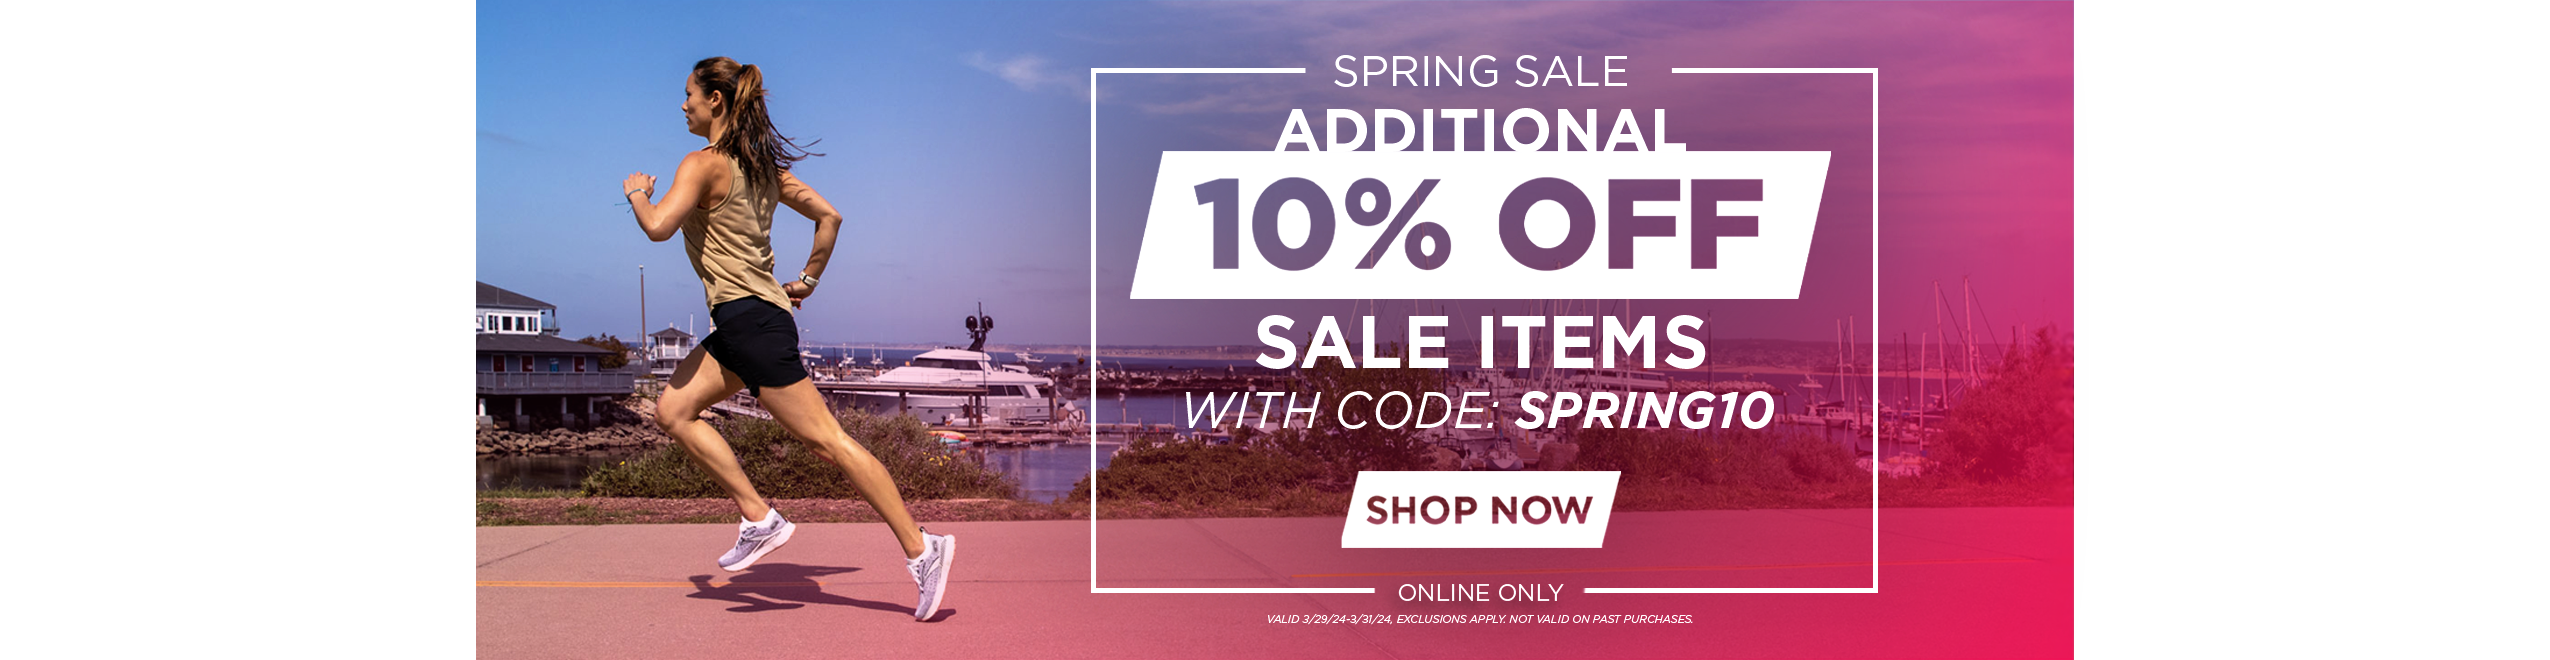 10% Off Sale Items with code SPRING10